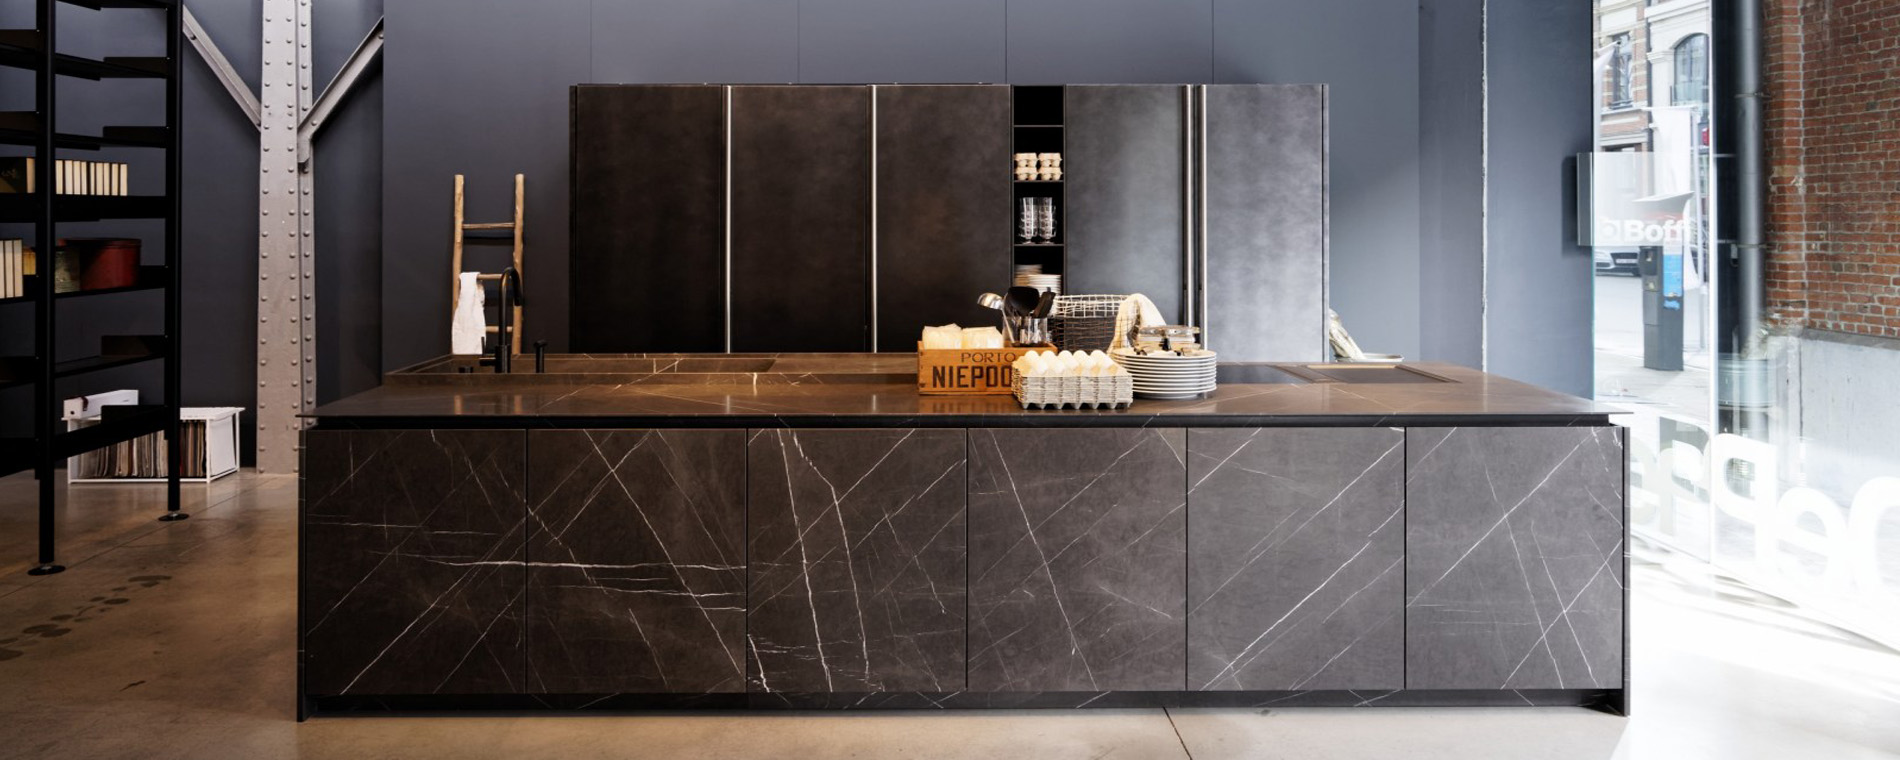 To Keep the Highest Quality Standards, Working Only & Specifically on Pietra Grey Marble Extraction & Production